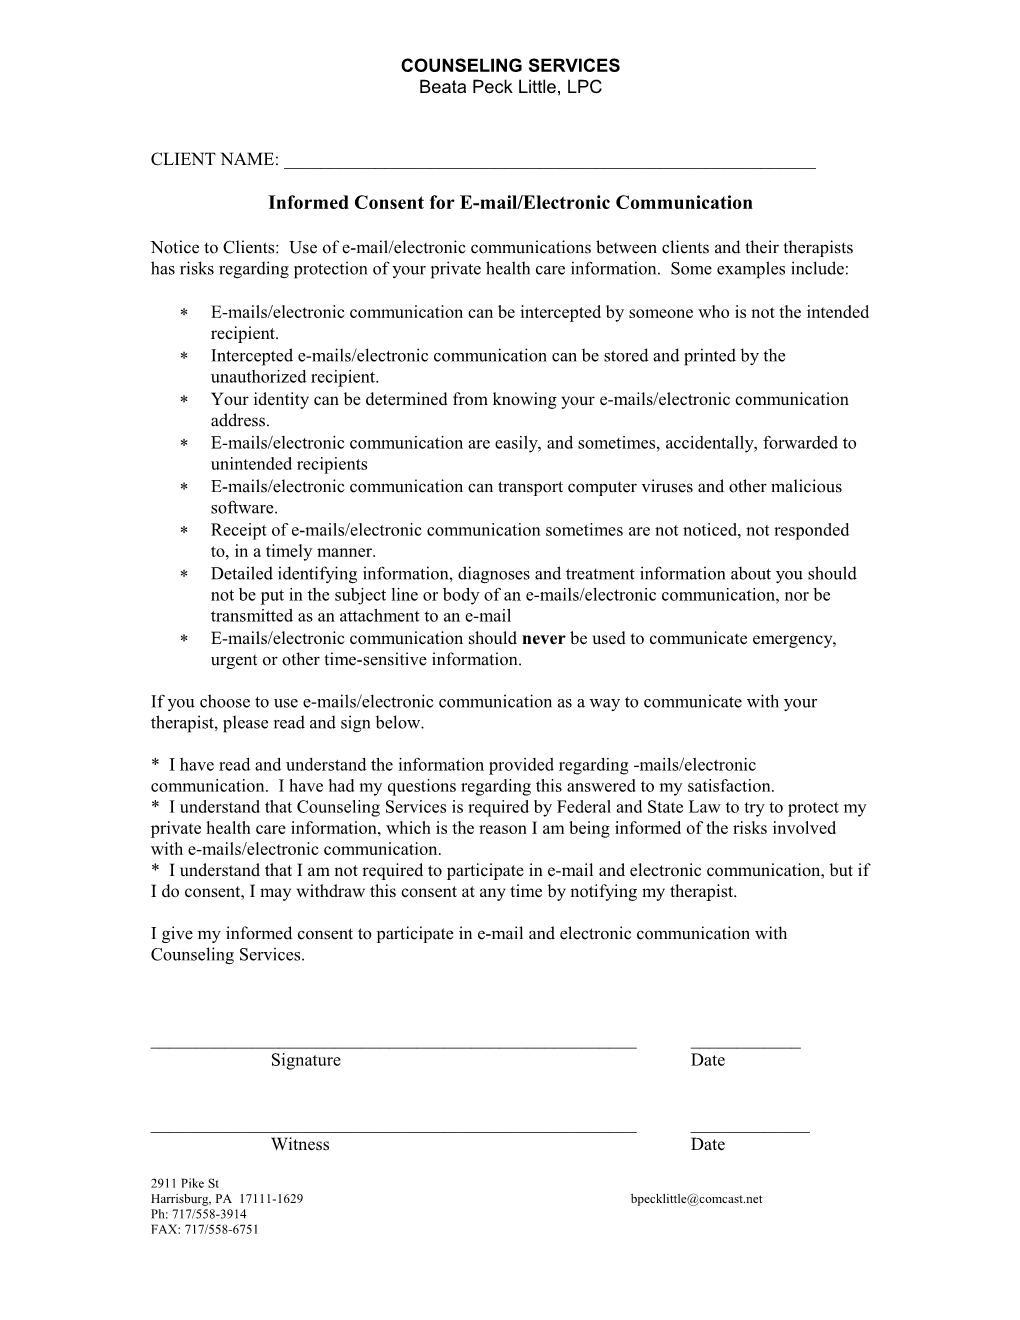 Informed Consent for E-Mail/Electronic Communication